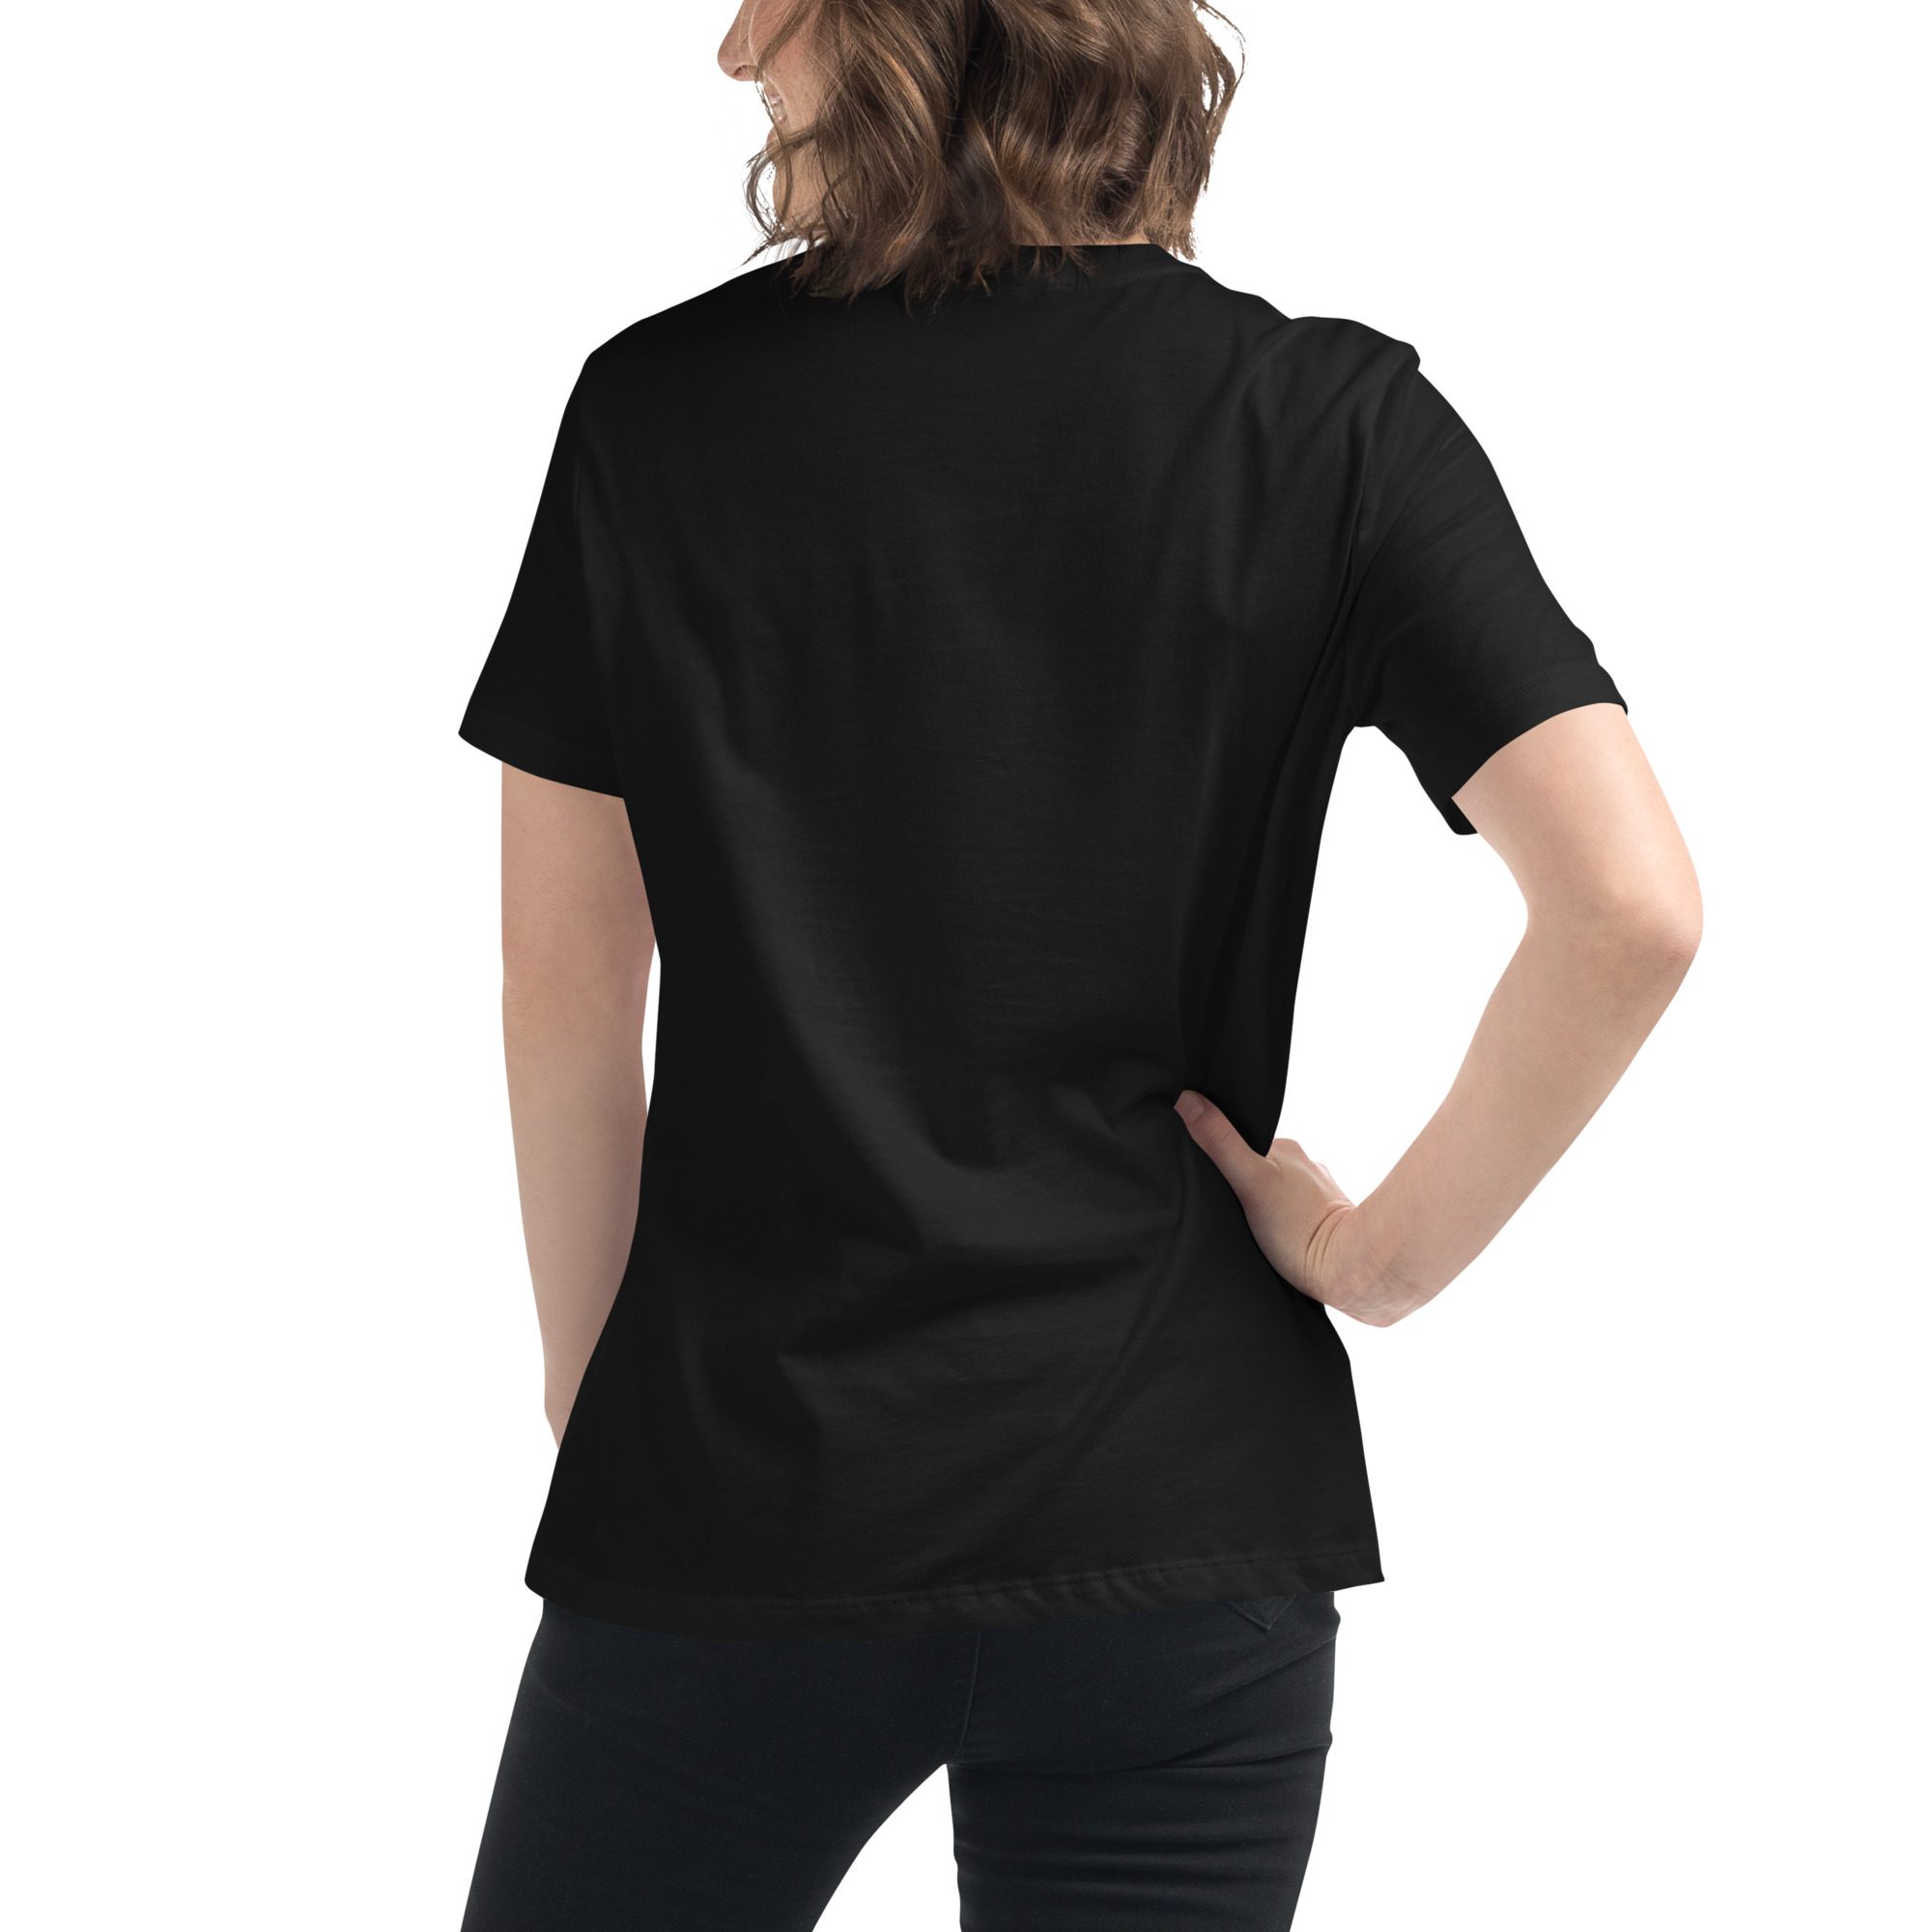 Powered By ADHD Women's Relaxed T-Shirt